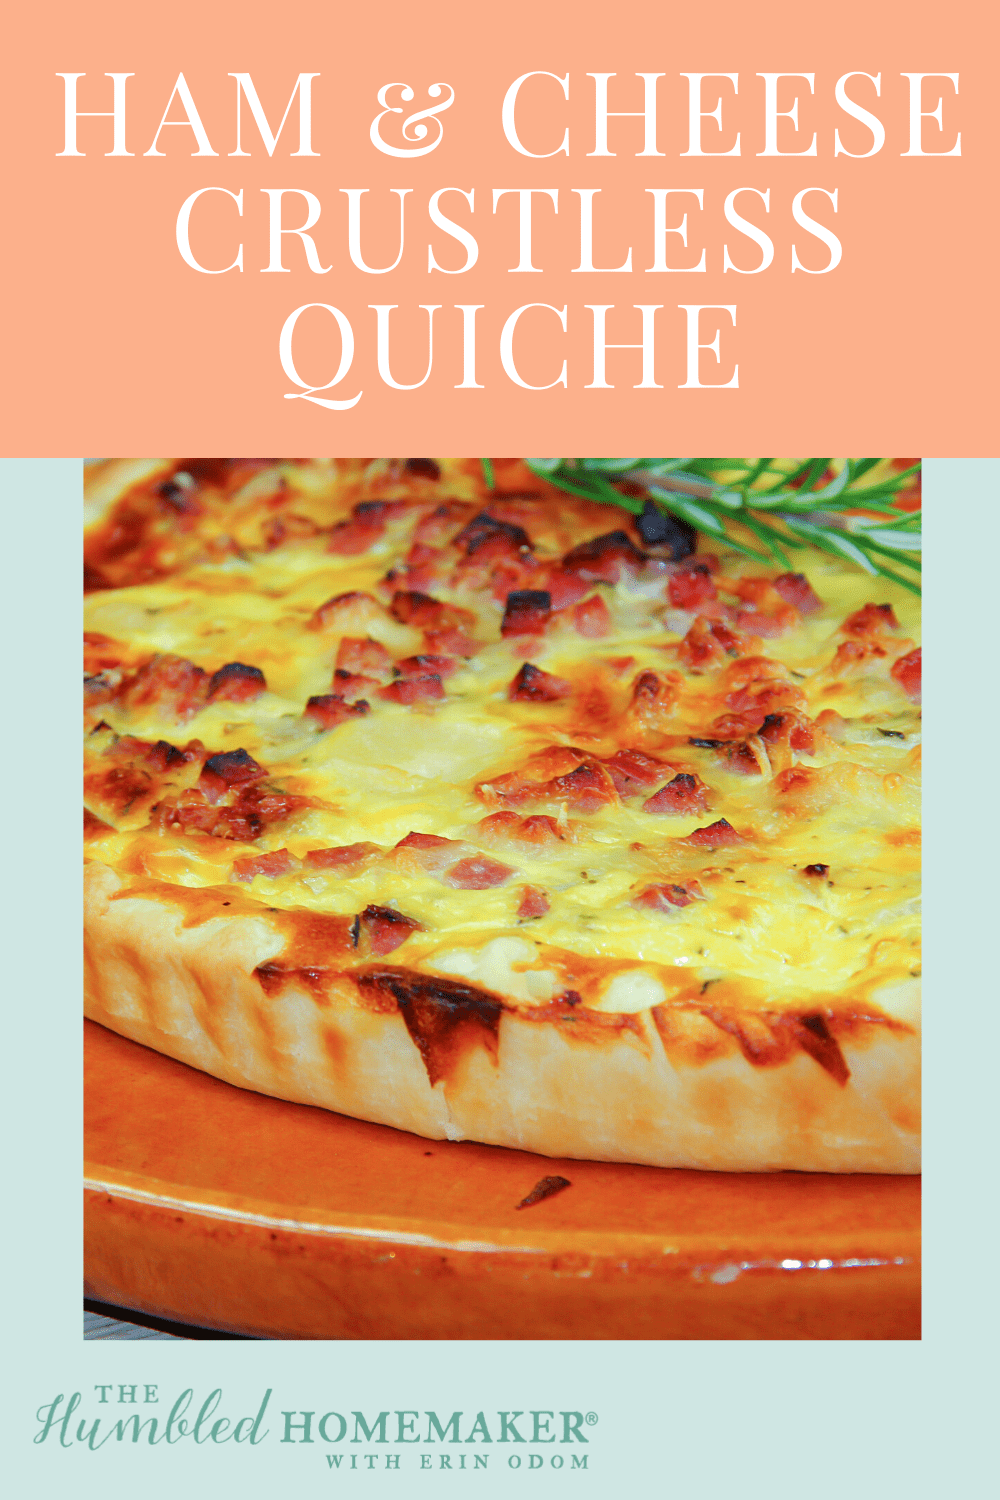 This ham and cheese crustless quiche recipe is incredibly easy to make, and it will be a hit with your family! Perfect for a fast holiday dish, it can also be served for breakfast, brunch, or even dinner all year long!